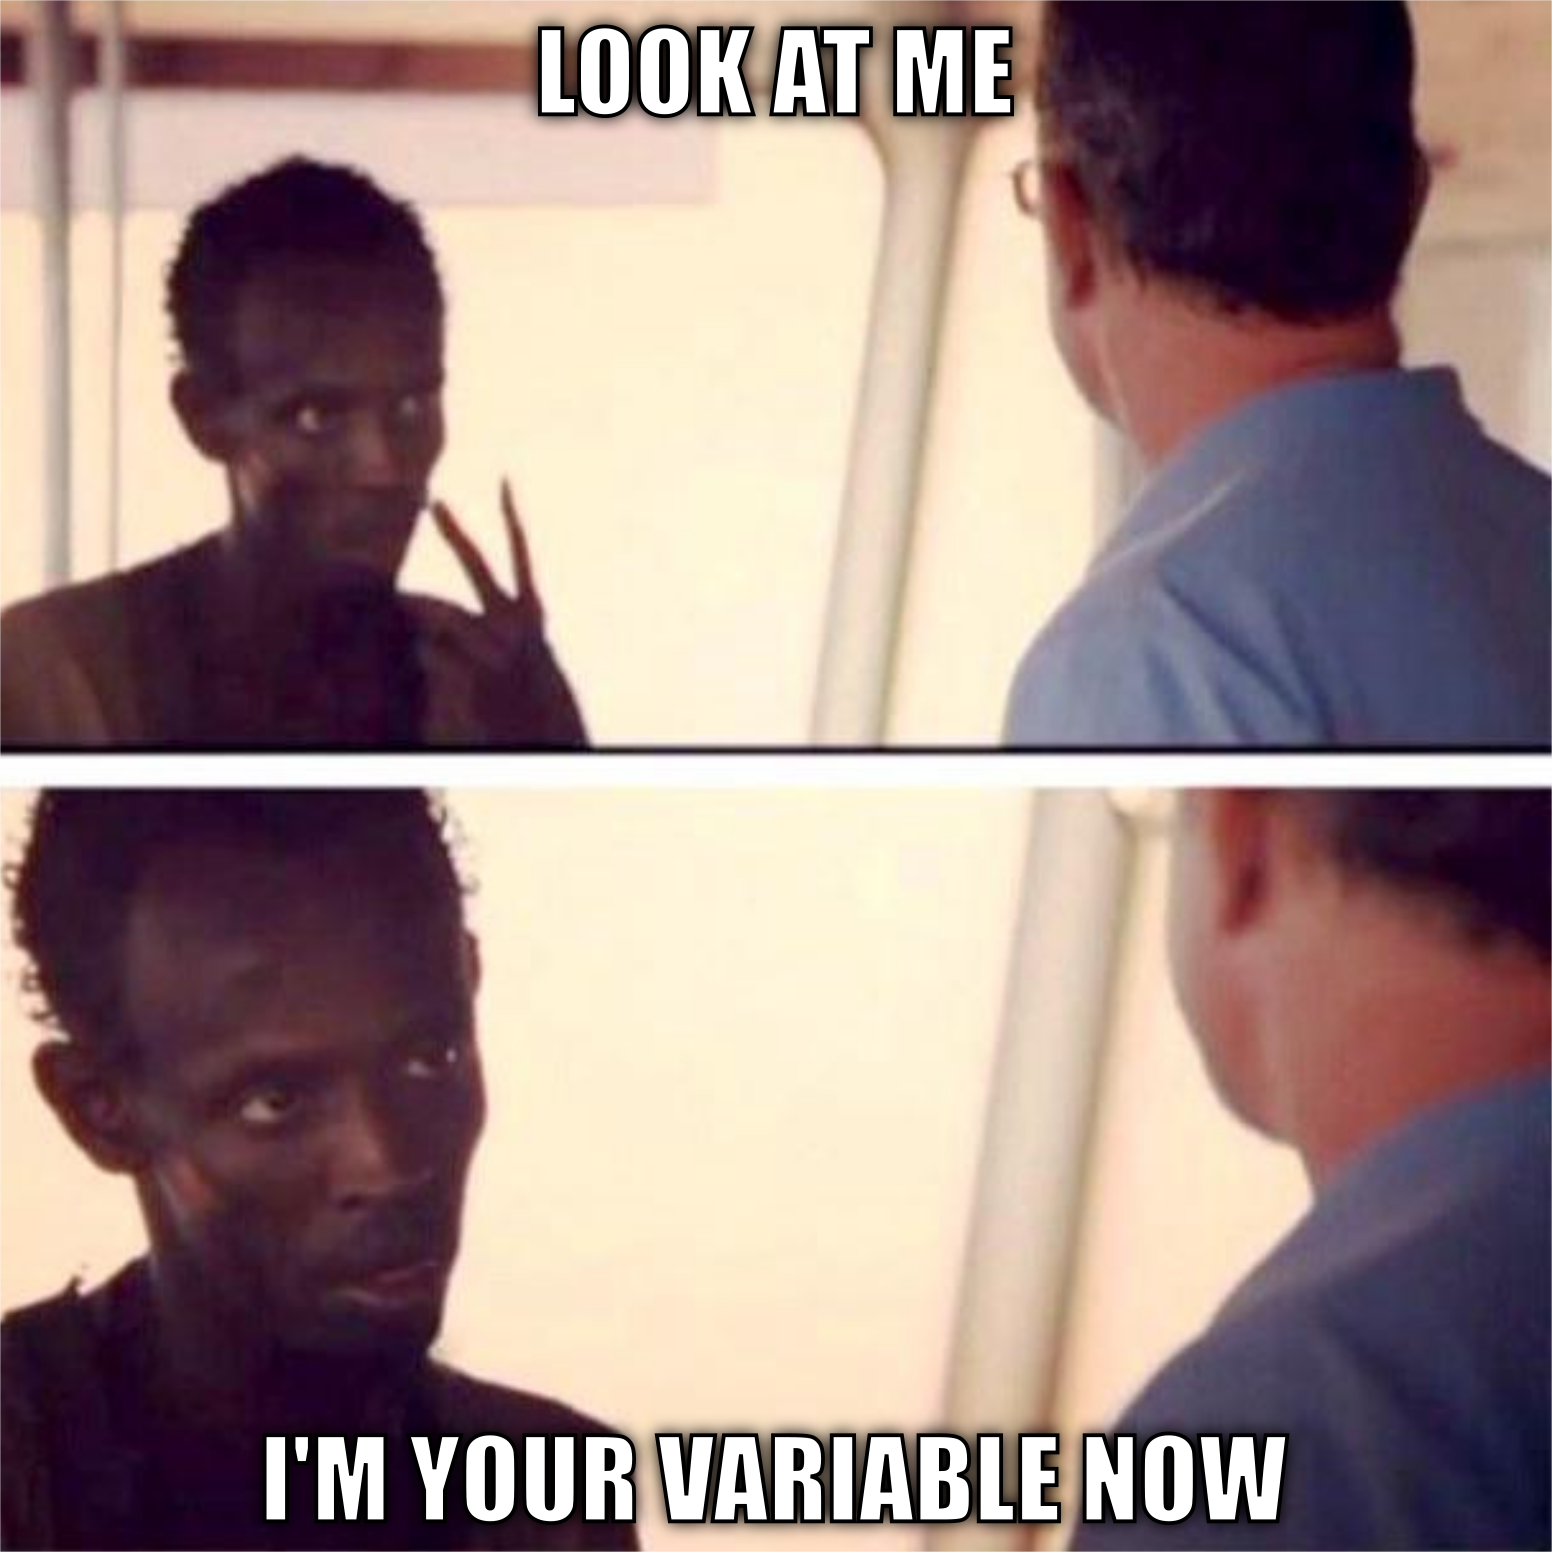 Look at me, I'm your variable now.